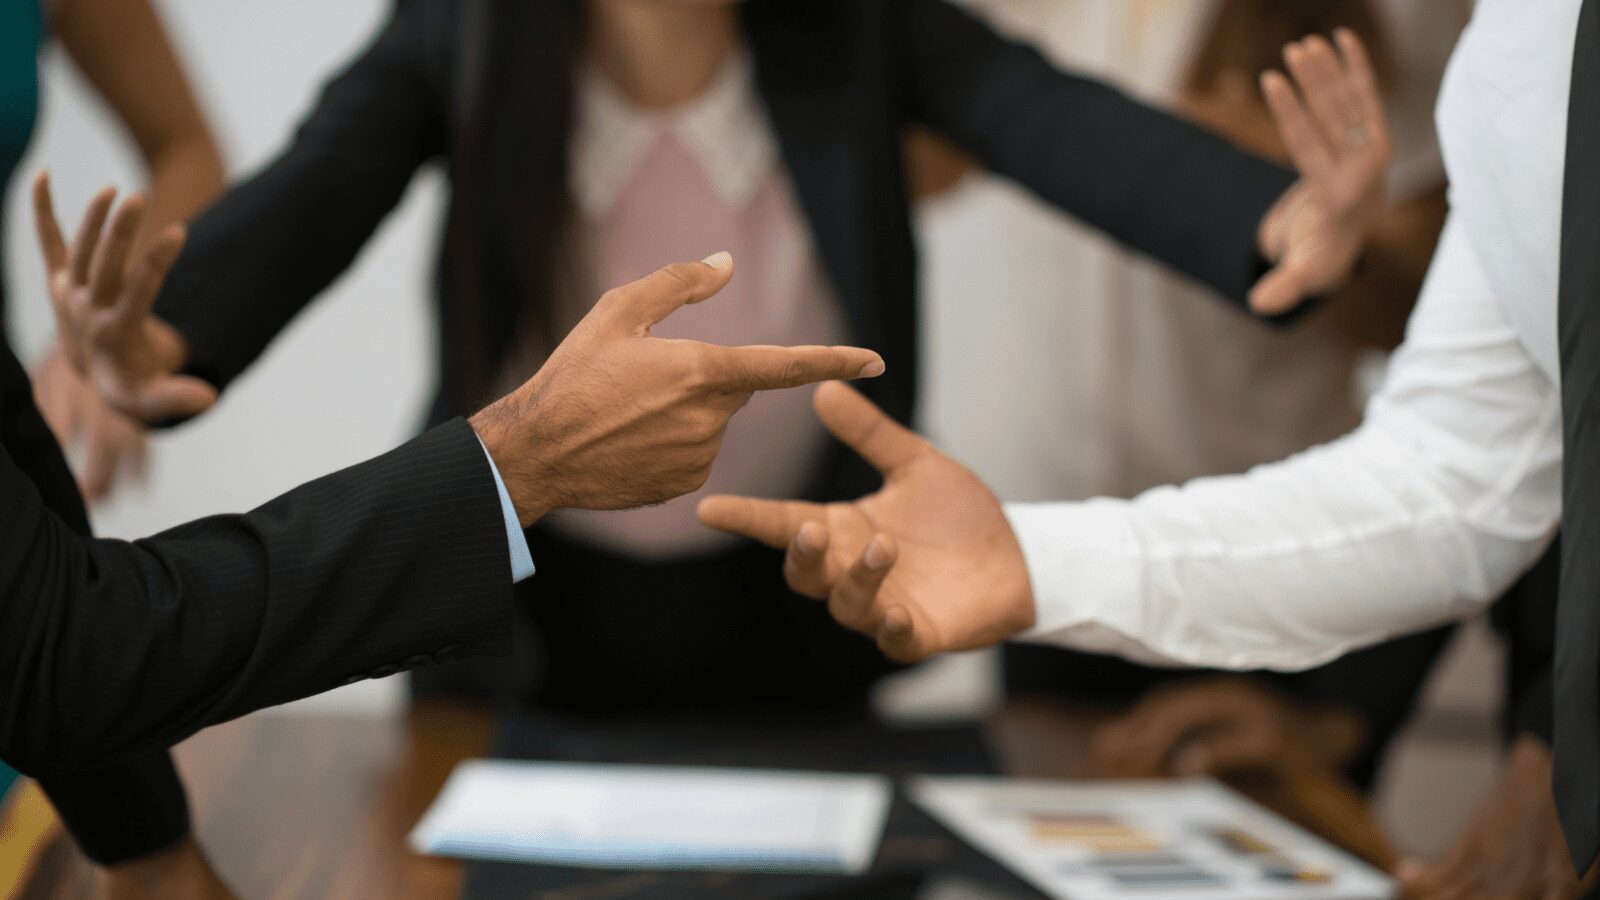 Hands held up in an argument during a meeting.